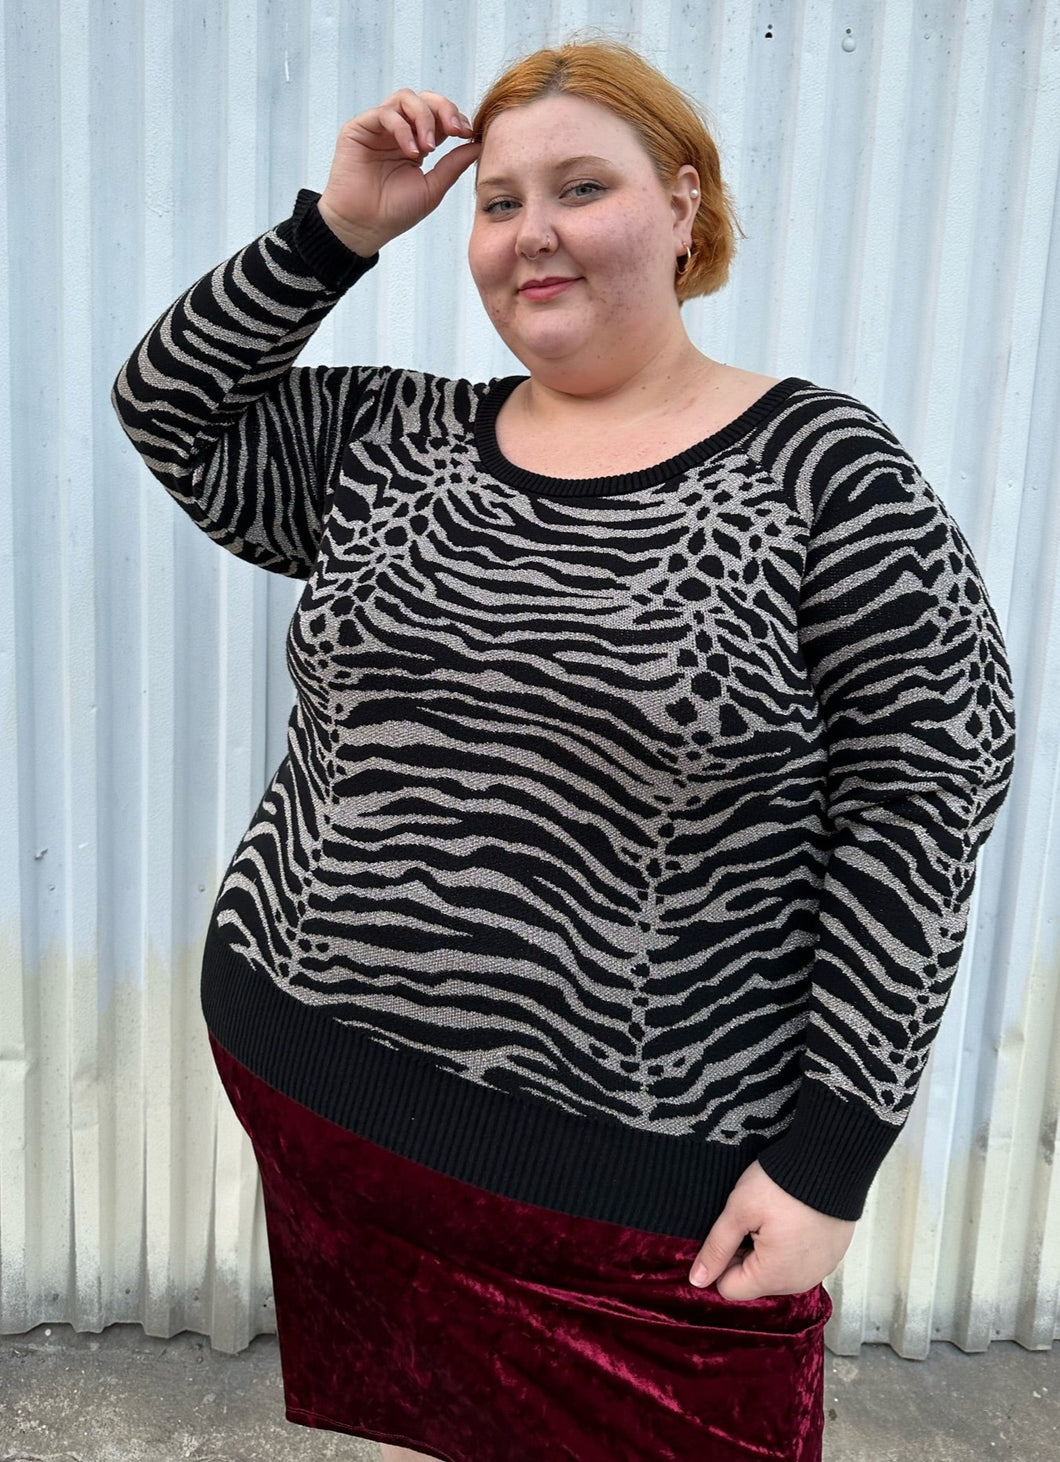 Front view of a size 3 Torrid black and silver metallic thread animal pattern sweater with black piping and cuffs styled with a red crushed velvet bodycon skirt on a size 22/24 model. The photo is taken outside in natural lighting.